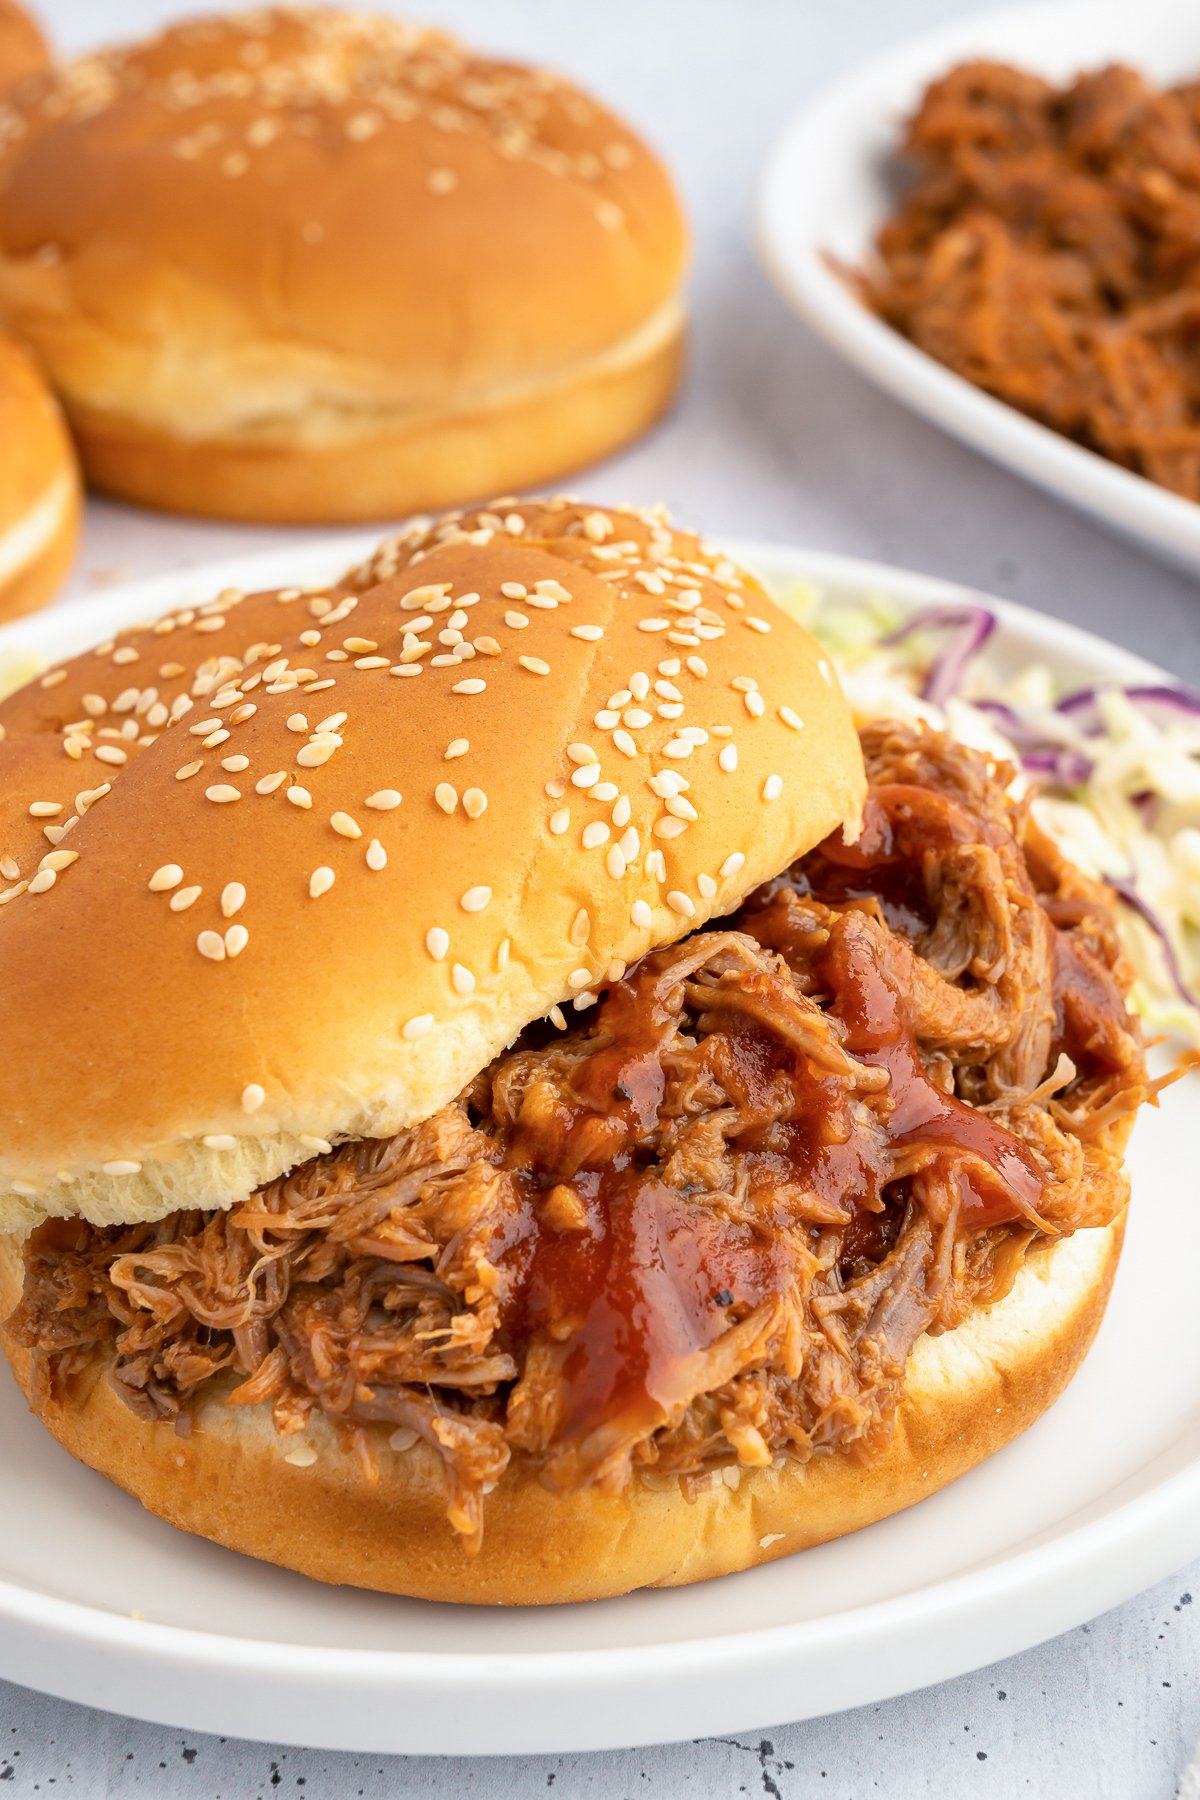 A pulled pork sandwich is in focus in the foreground, hamburger buns and more pork is out of focus in the background.